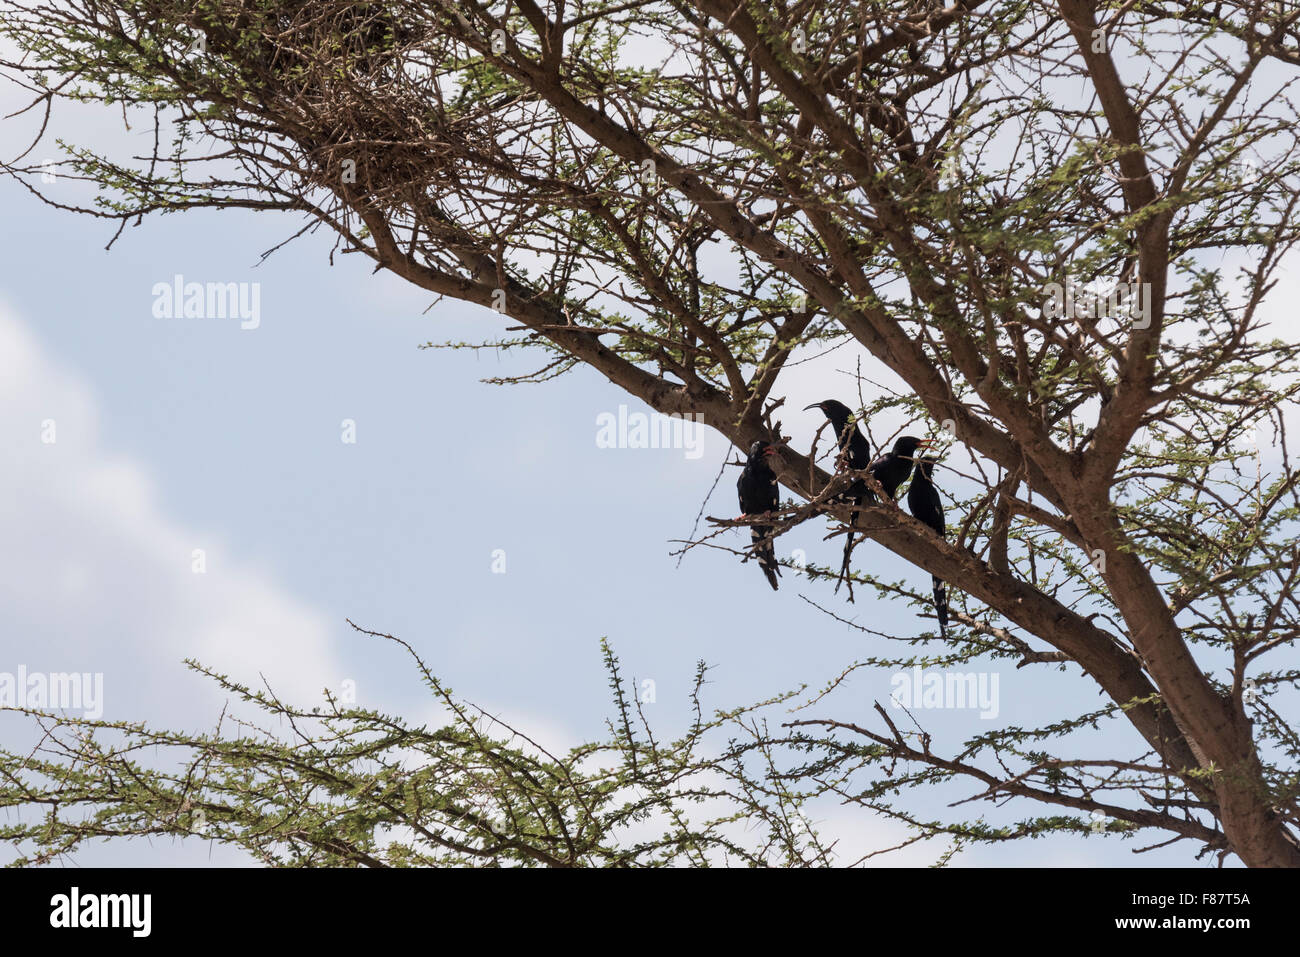 A group of four Black-Headed Wood Hoopoes perched in a tree near Bilen, Awash, Ethiopia Stock Photo